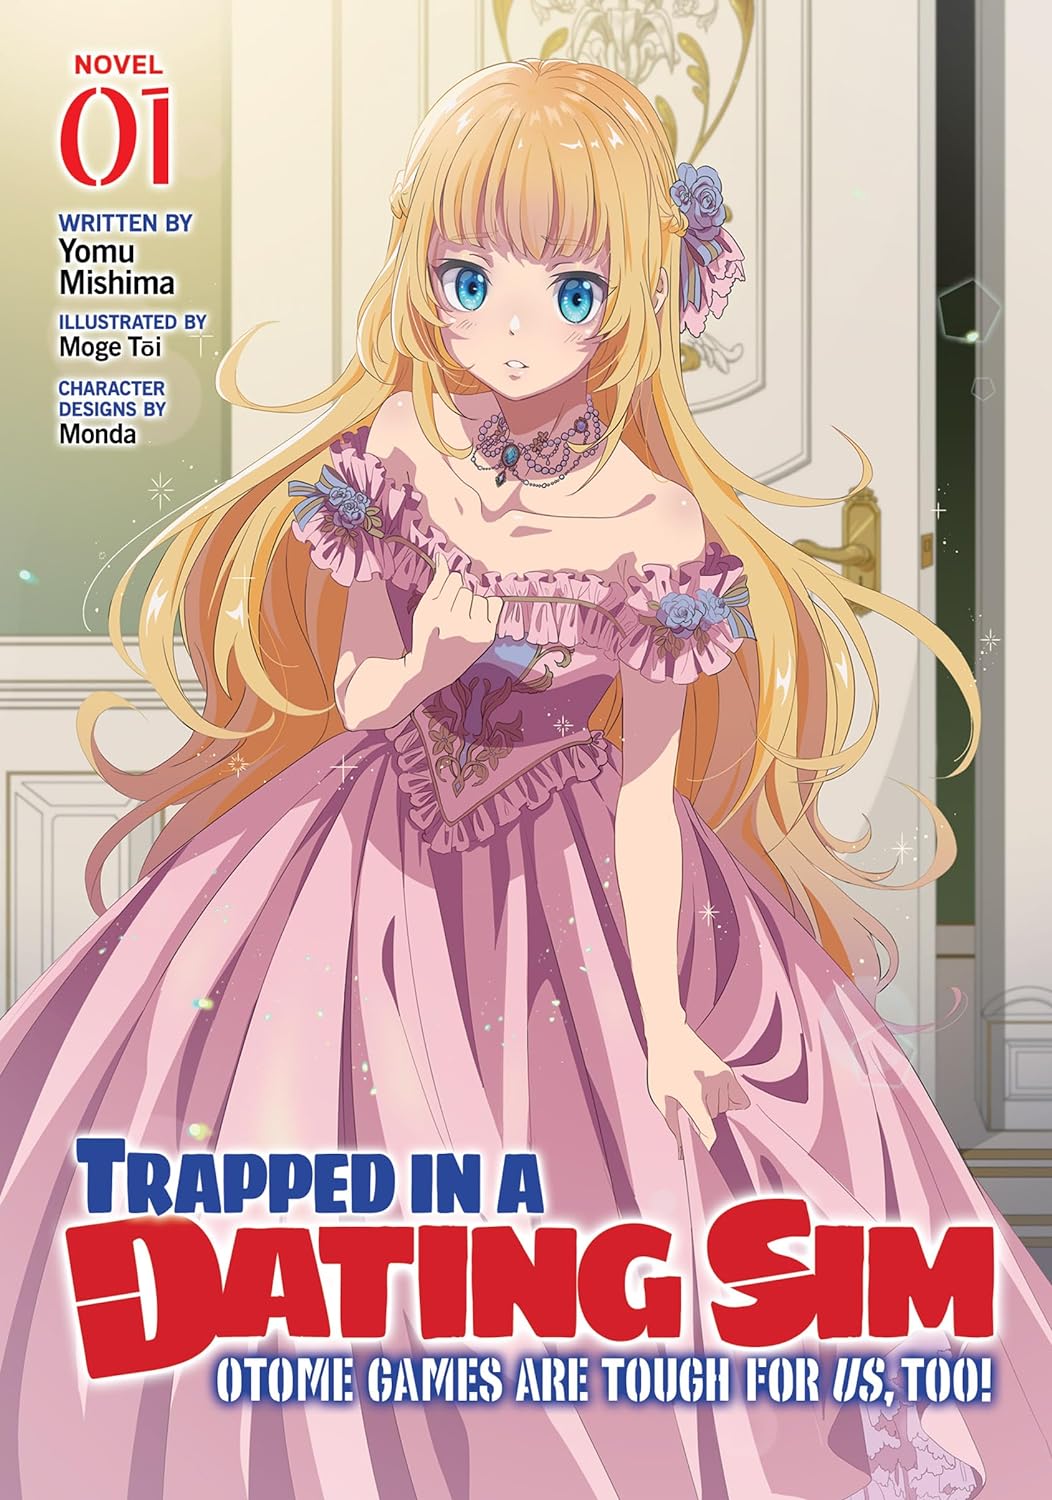 Trapped in a Dating Sim: Otome Games Are Tough for Us, Too! (Light Novel) Vol. 01